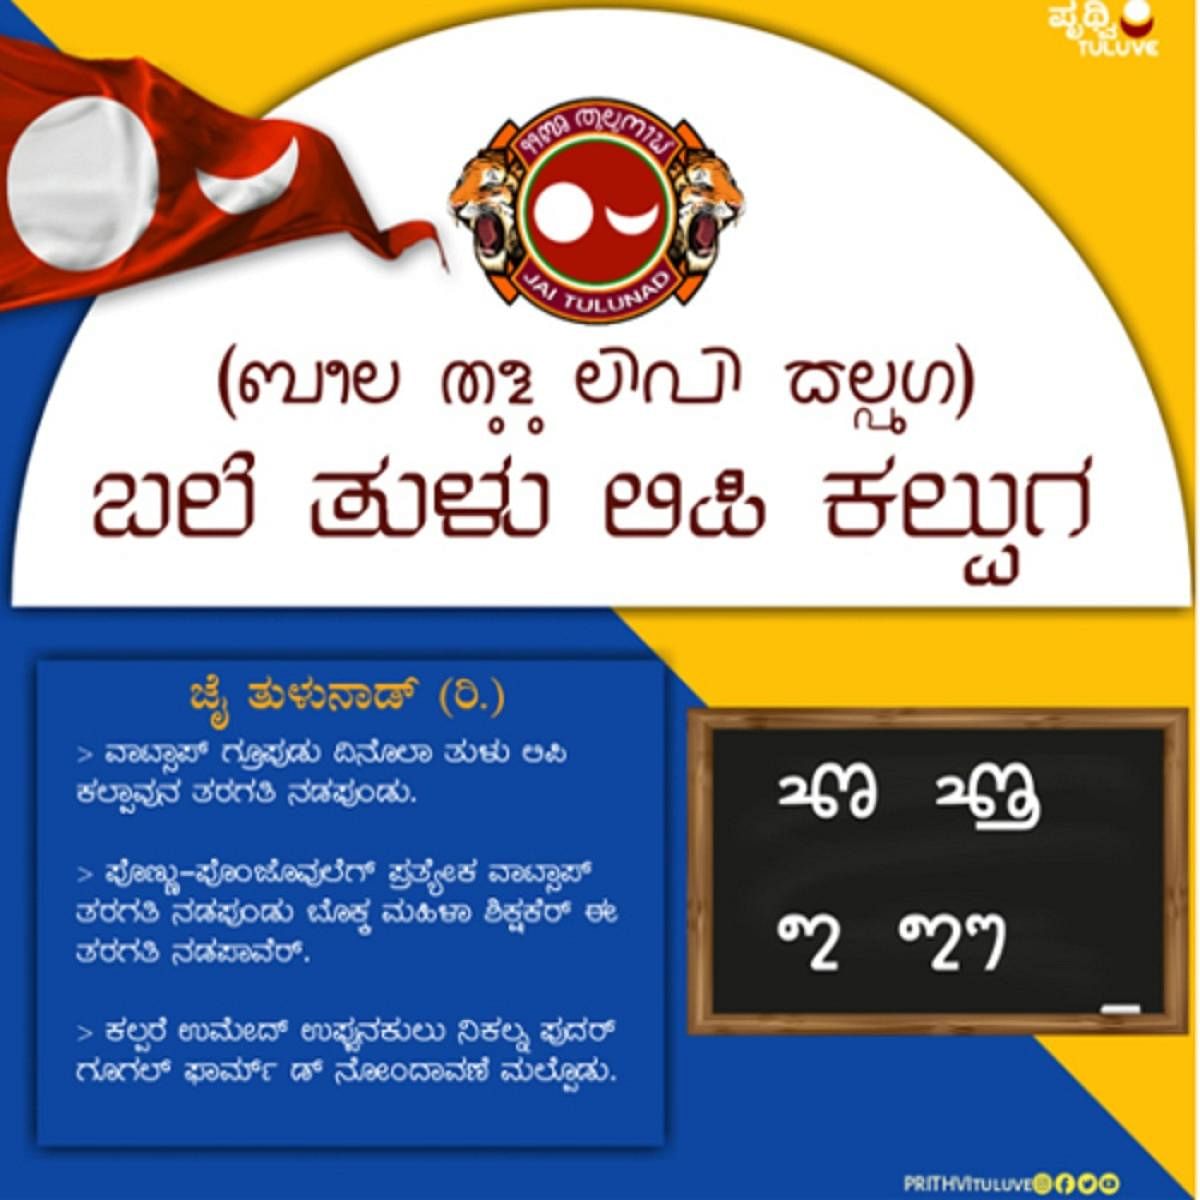 Tulu script to be taught online